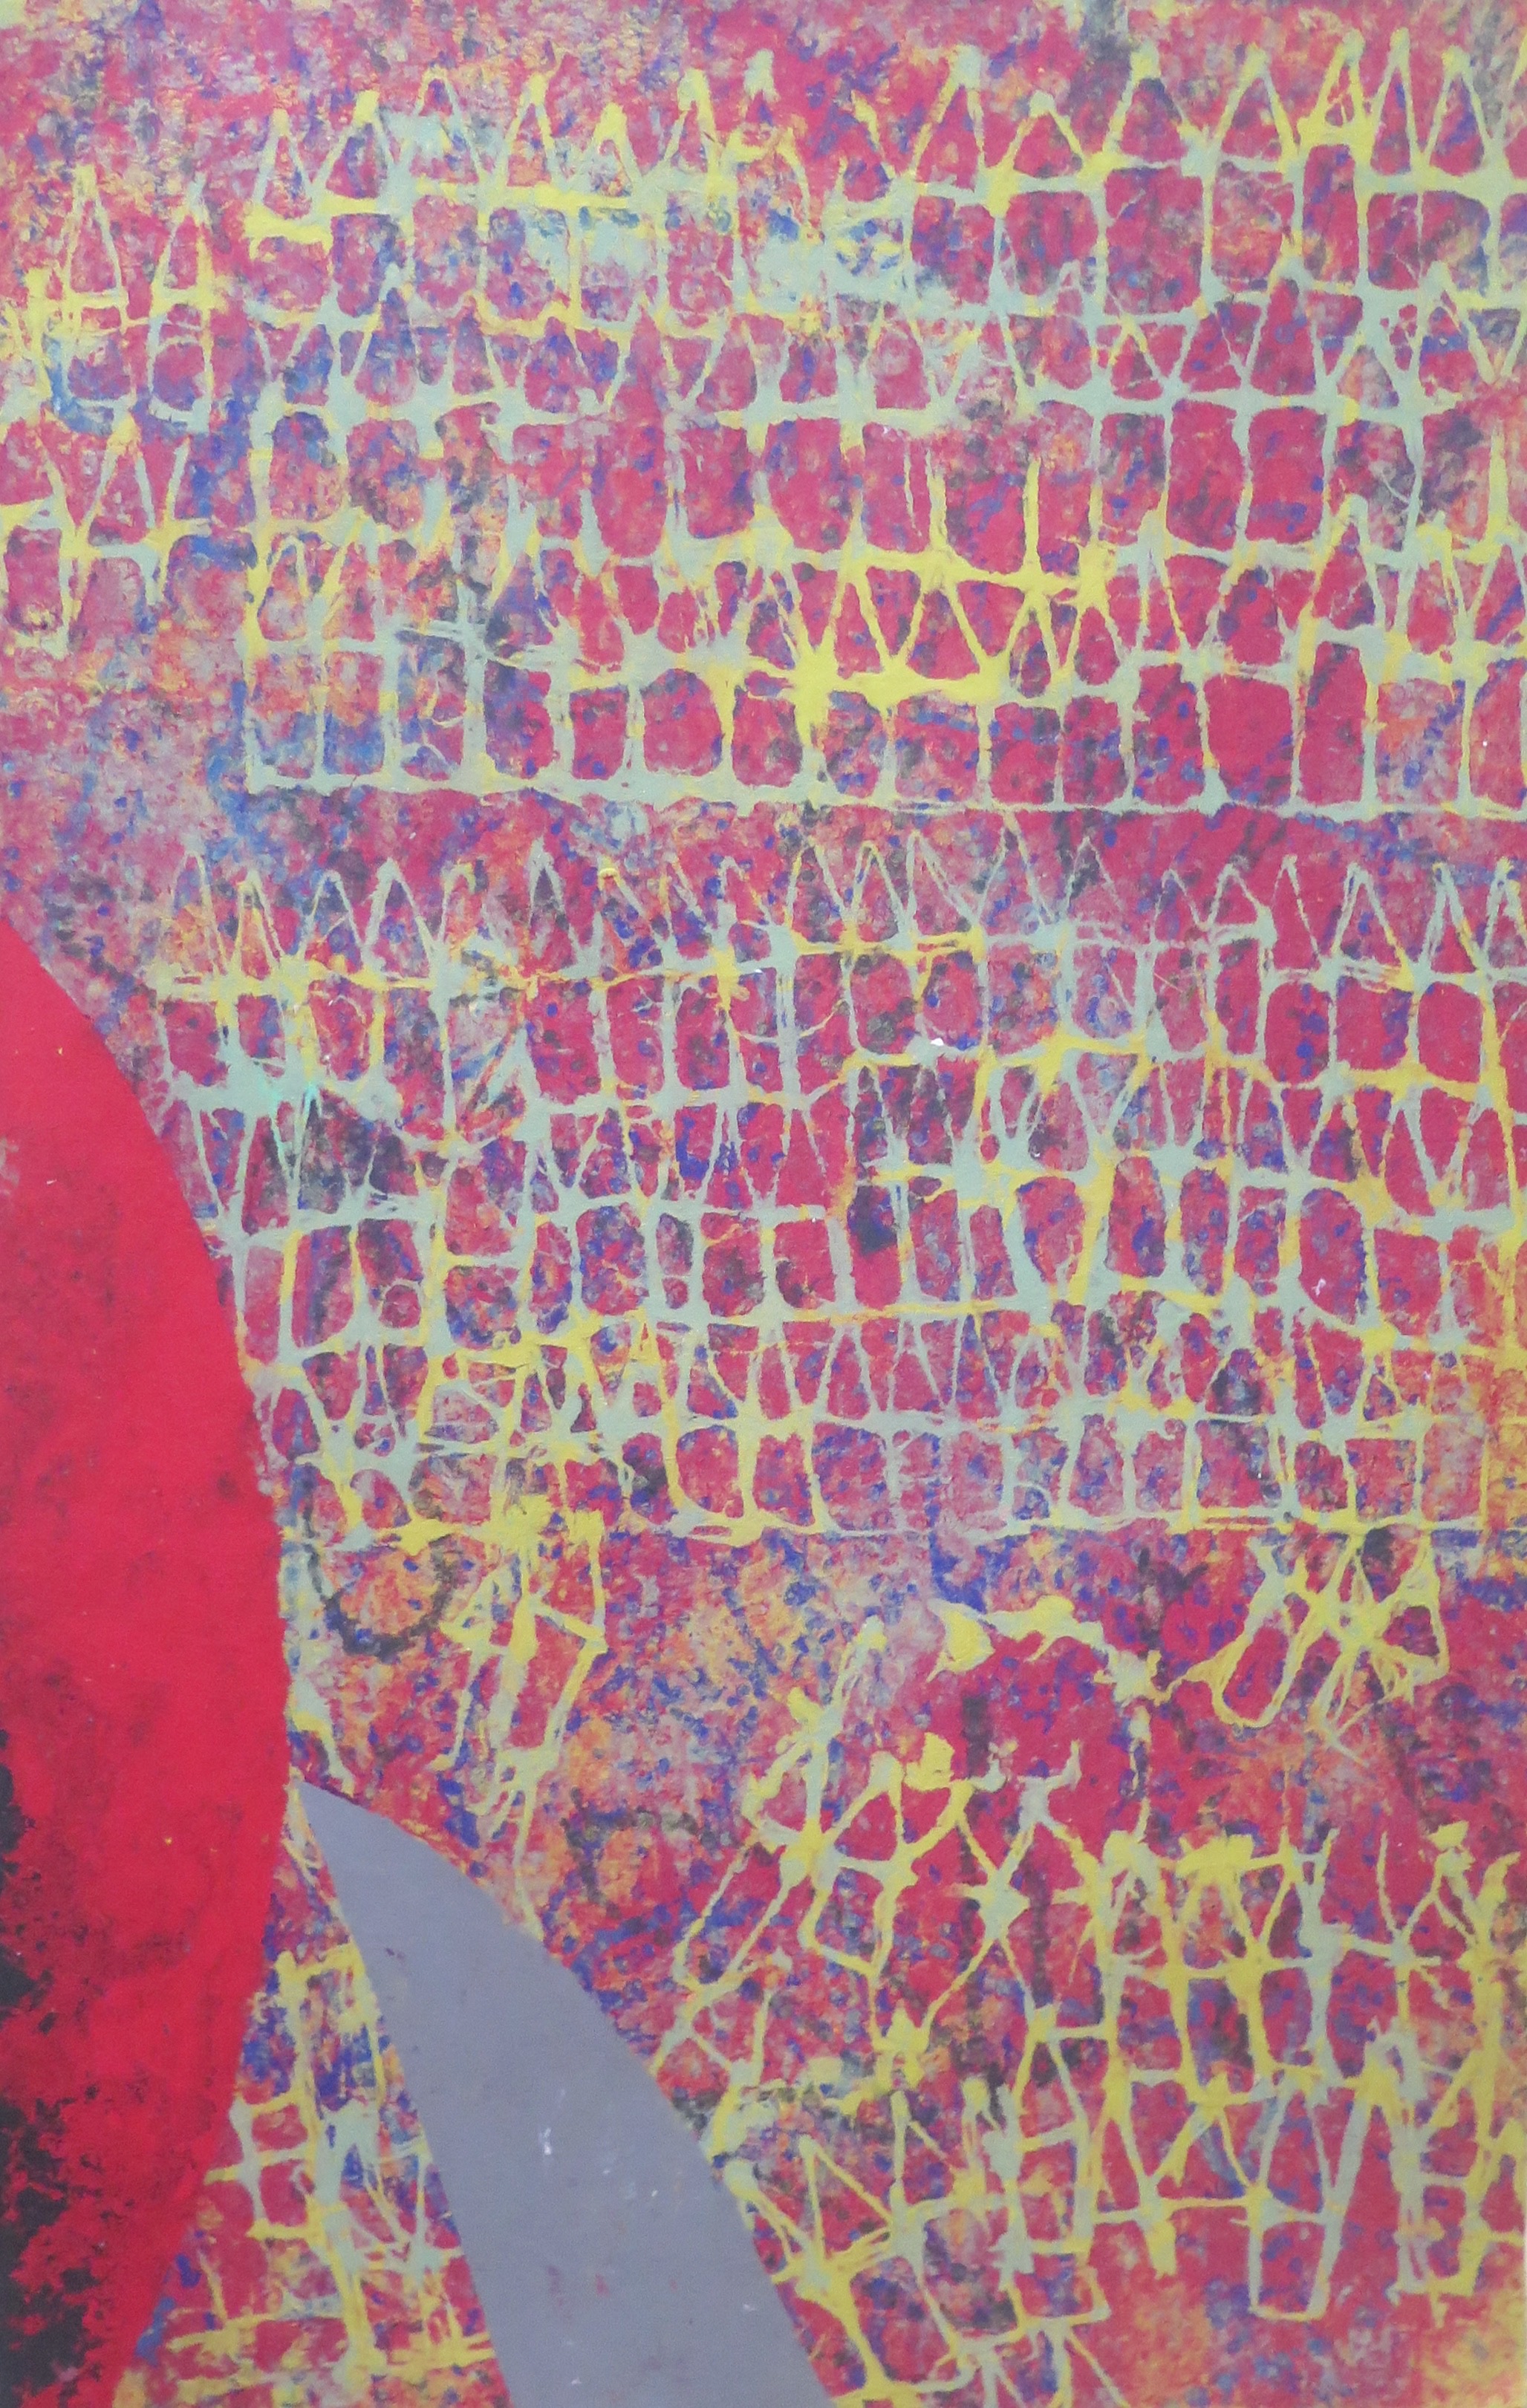 Saturated magenta scales like skin cells dominate the picture plane in this piece, "Motivation for Mobilization," by Lea Basile-Lazarus.  The cell walls, consisting of house-like structures with pointed roofs, comprise the blue and yellow negative space between the raw, meaty material in magenta marbled with blue.  A sharp gray blade-like shape scrapes against the edge of a bold, solid, pink half-ellipse in the lower left-hand corner of the sheet.